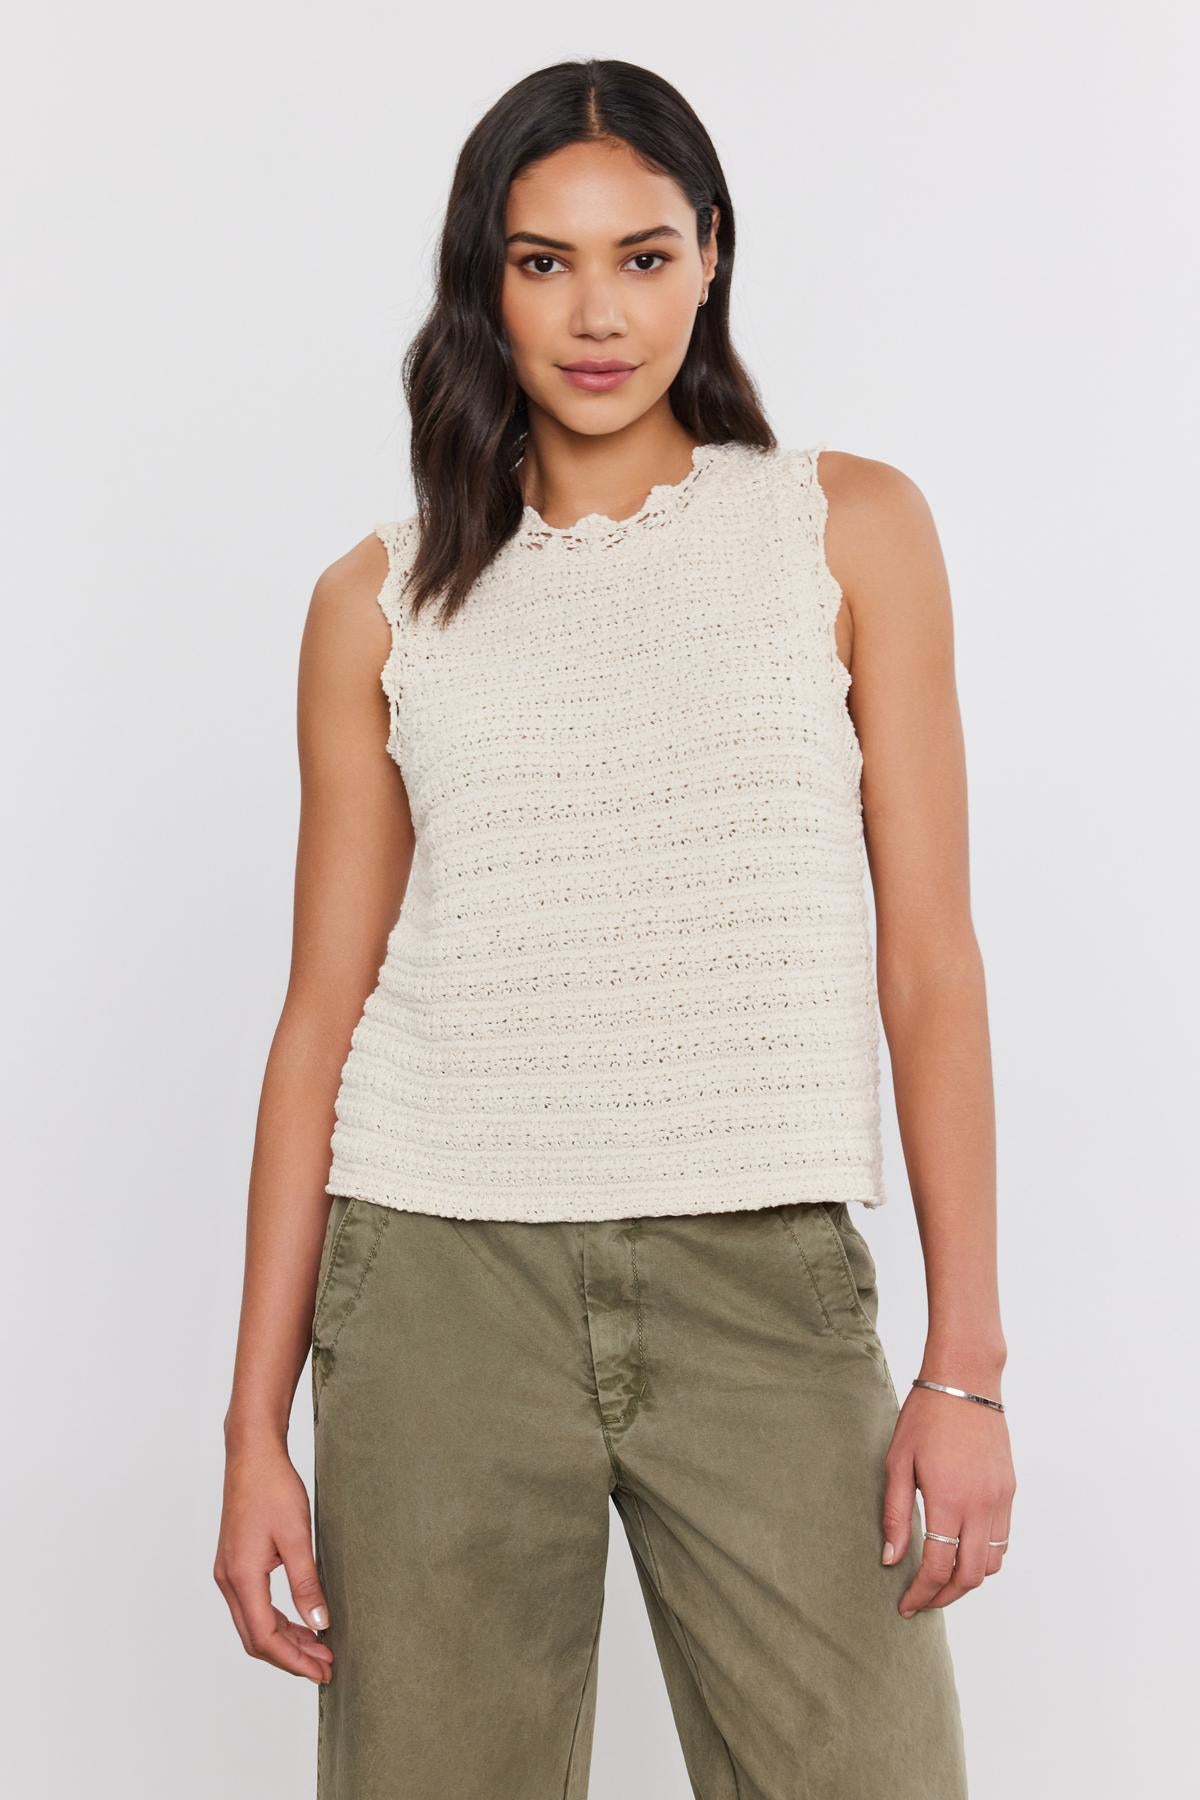 A person stands against a plain background wearing a sleeveless, cream-colored Velvet by Graham & Spencer SOPHIE SWEATER VEST with scallop details and green pants.-37054560403649